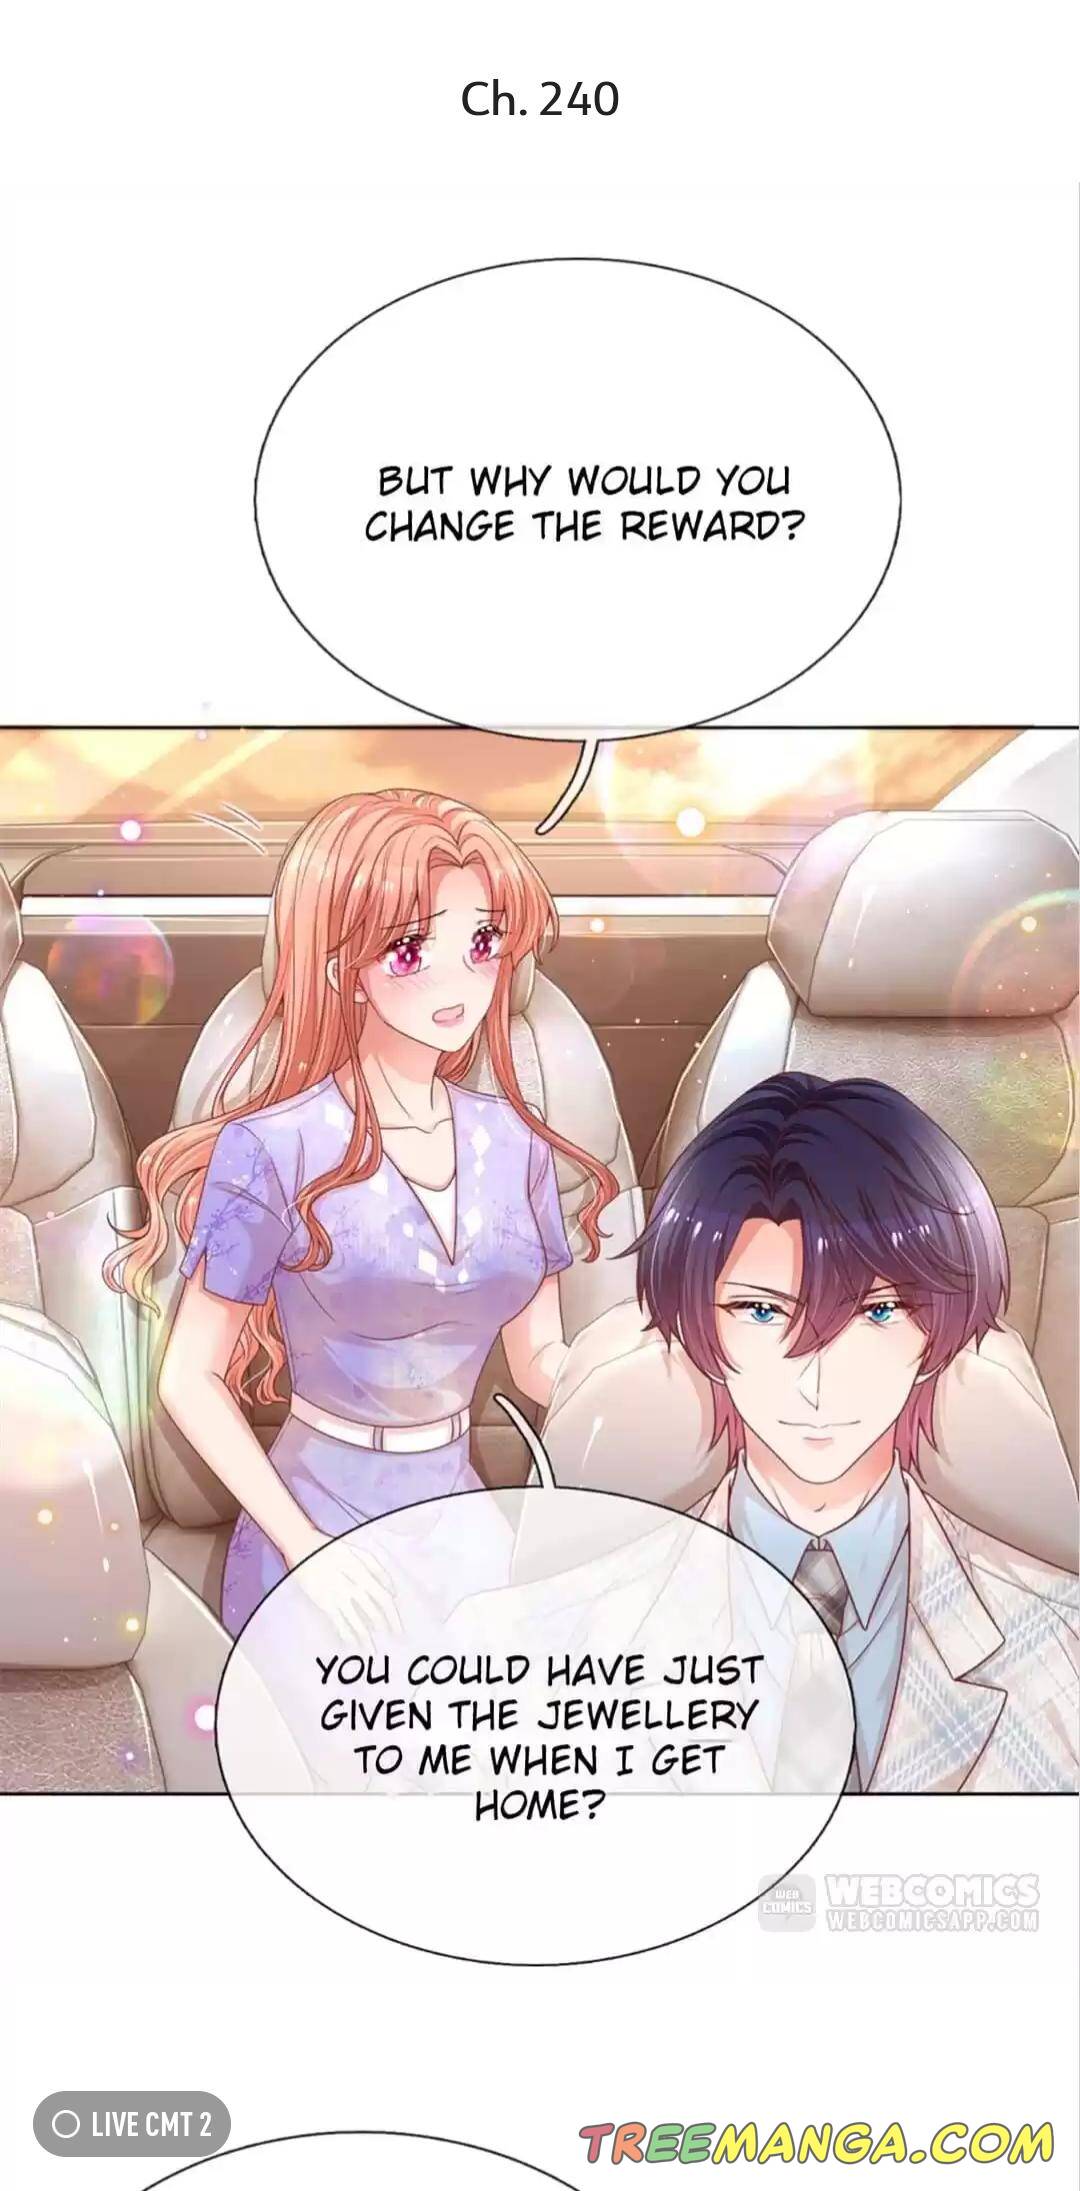 Sweet Escape (Manhua) - Page 1